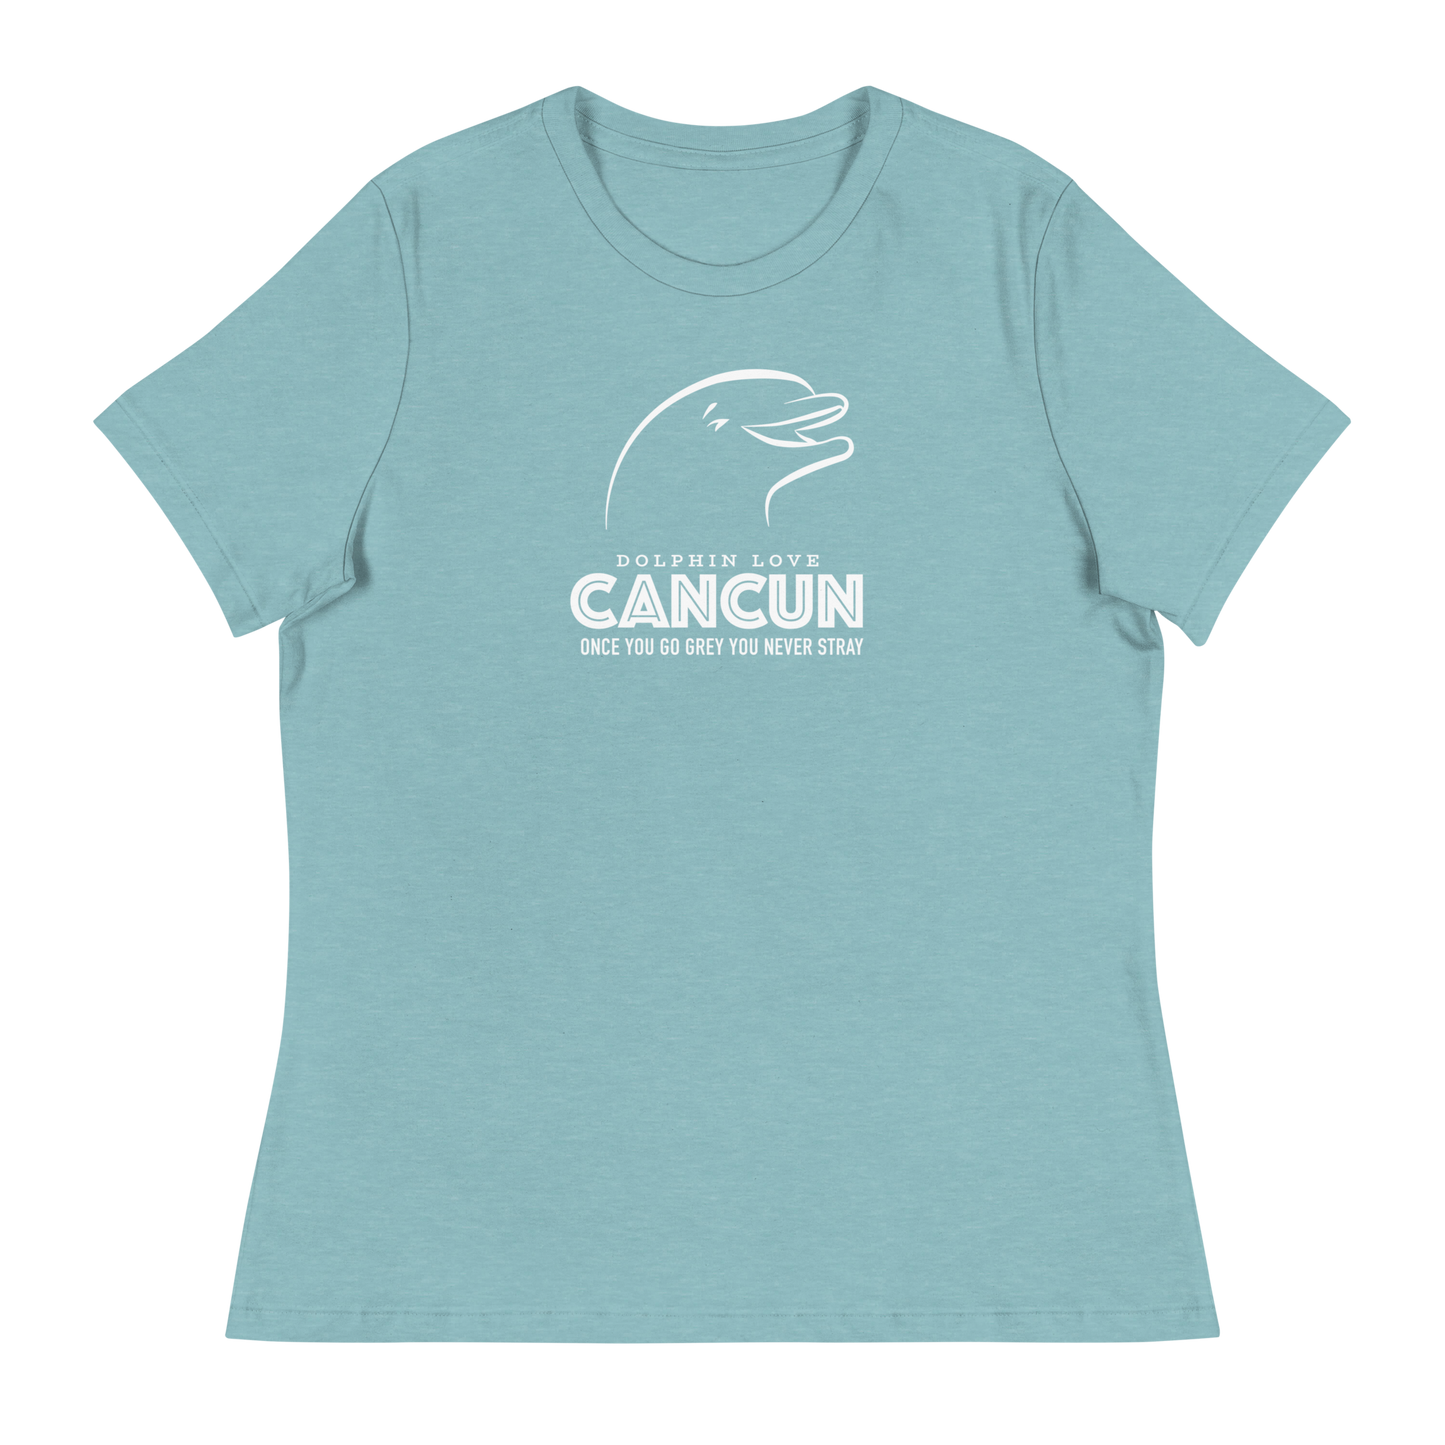 Women's - CANCUN - Once you go grey you never stray Dolphin - Funny T-Shirt